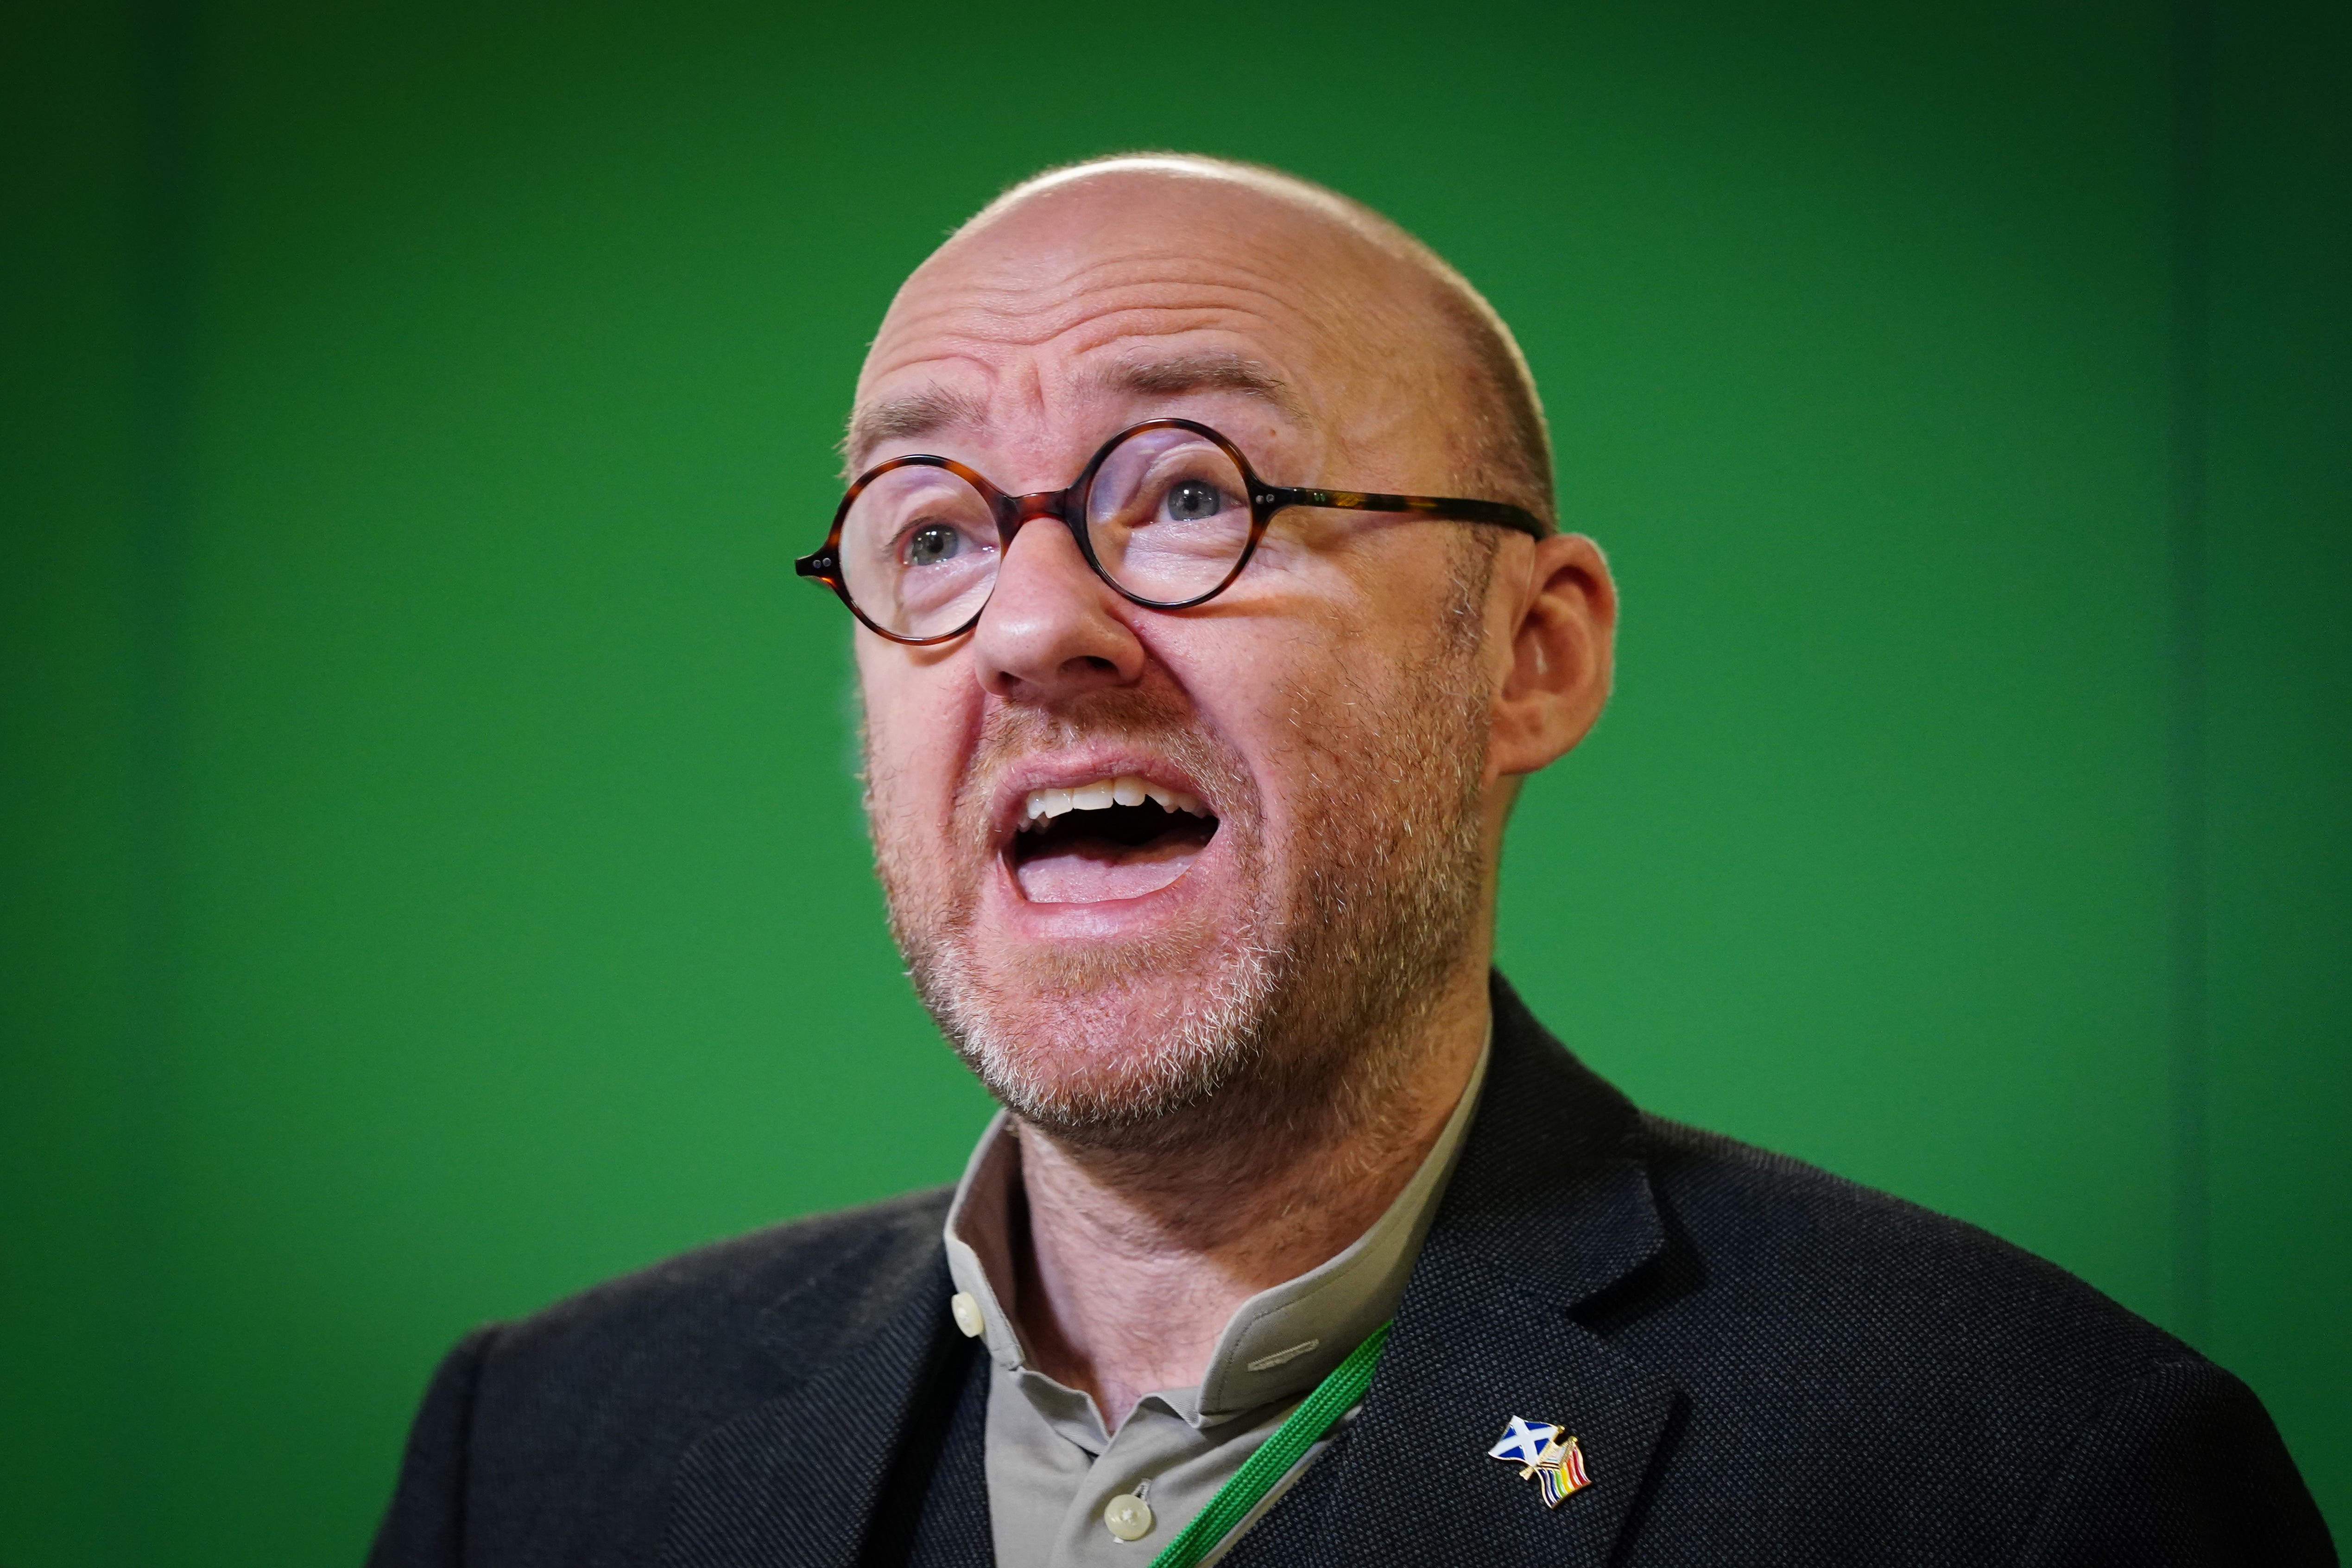 The future of the power-sharing deal between the Scottish Greens and the SNP is set to be determined, Patrick Harvie said. (Jane Barlow/PA)